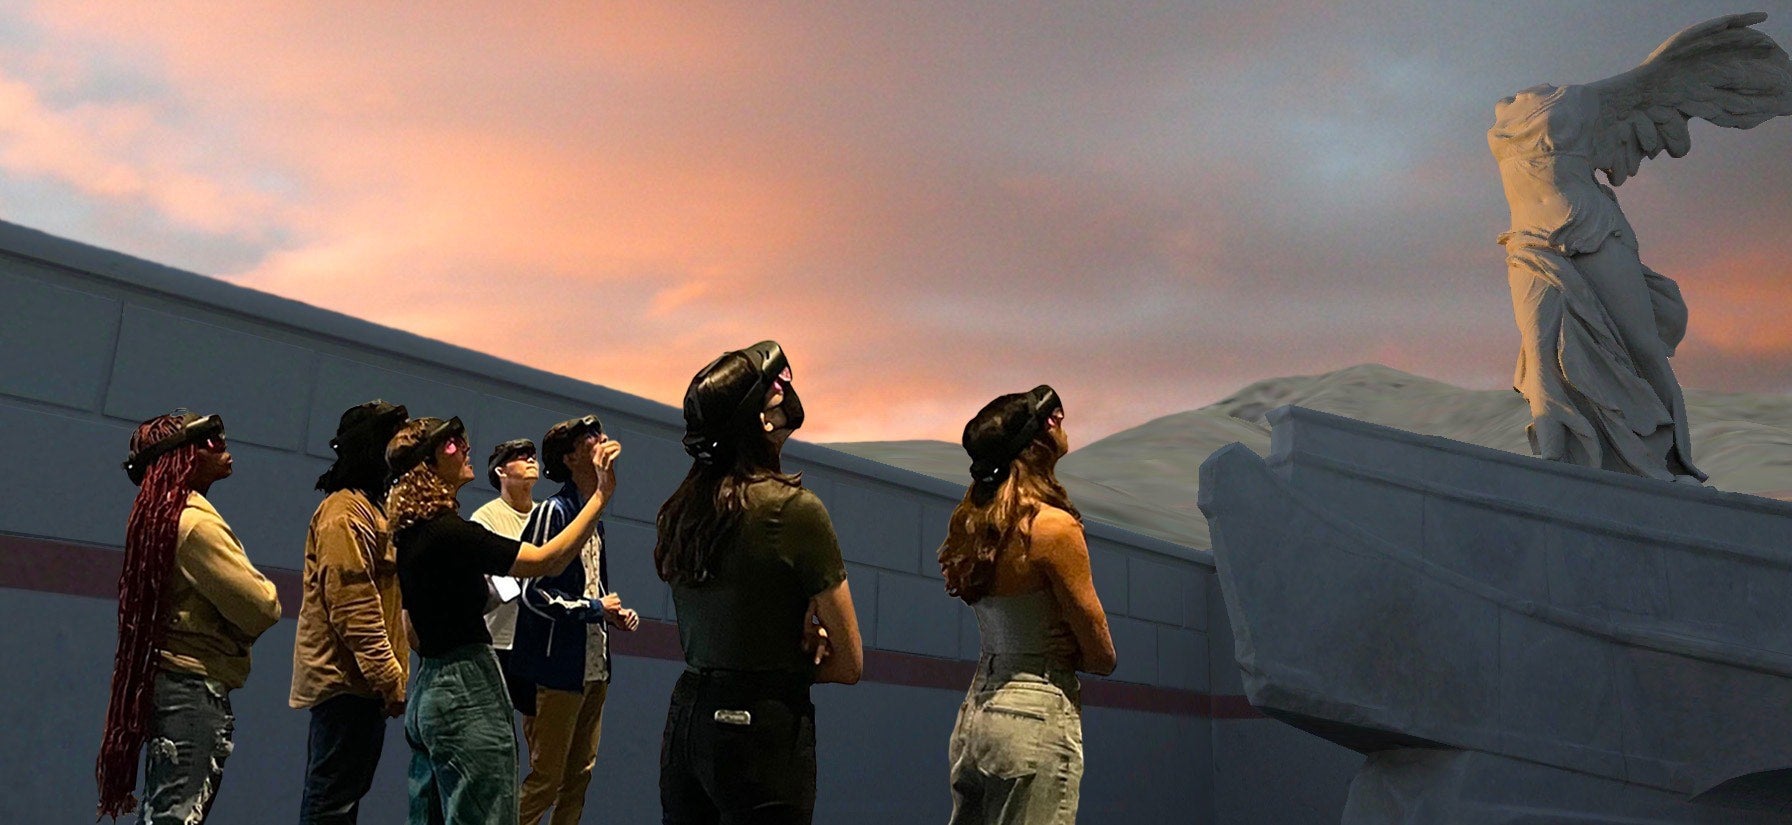 students wearing VR headsets viewing a statue against a cotton candy colored sky